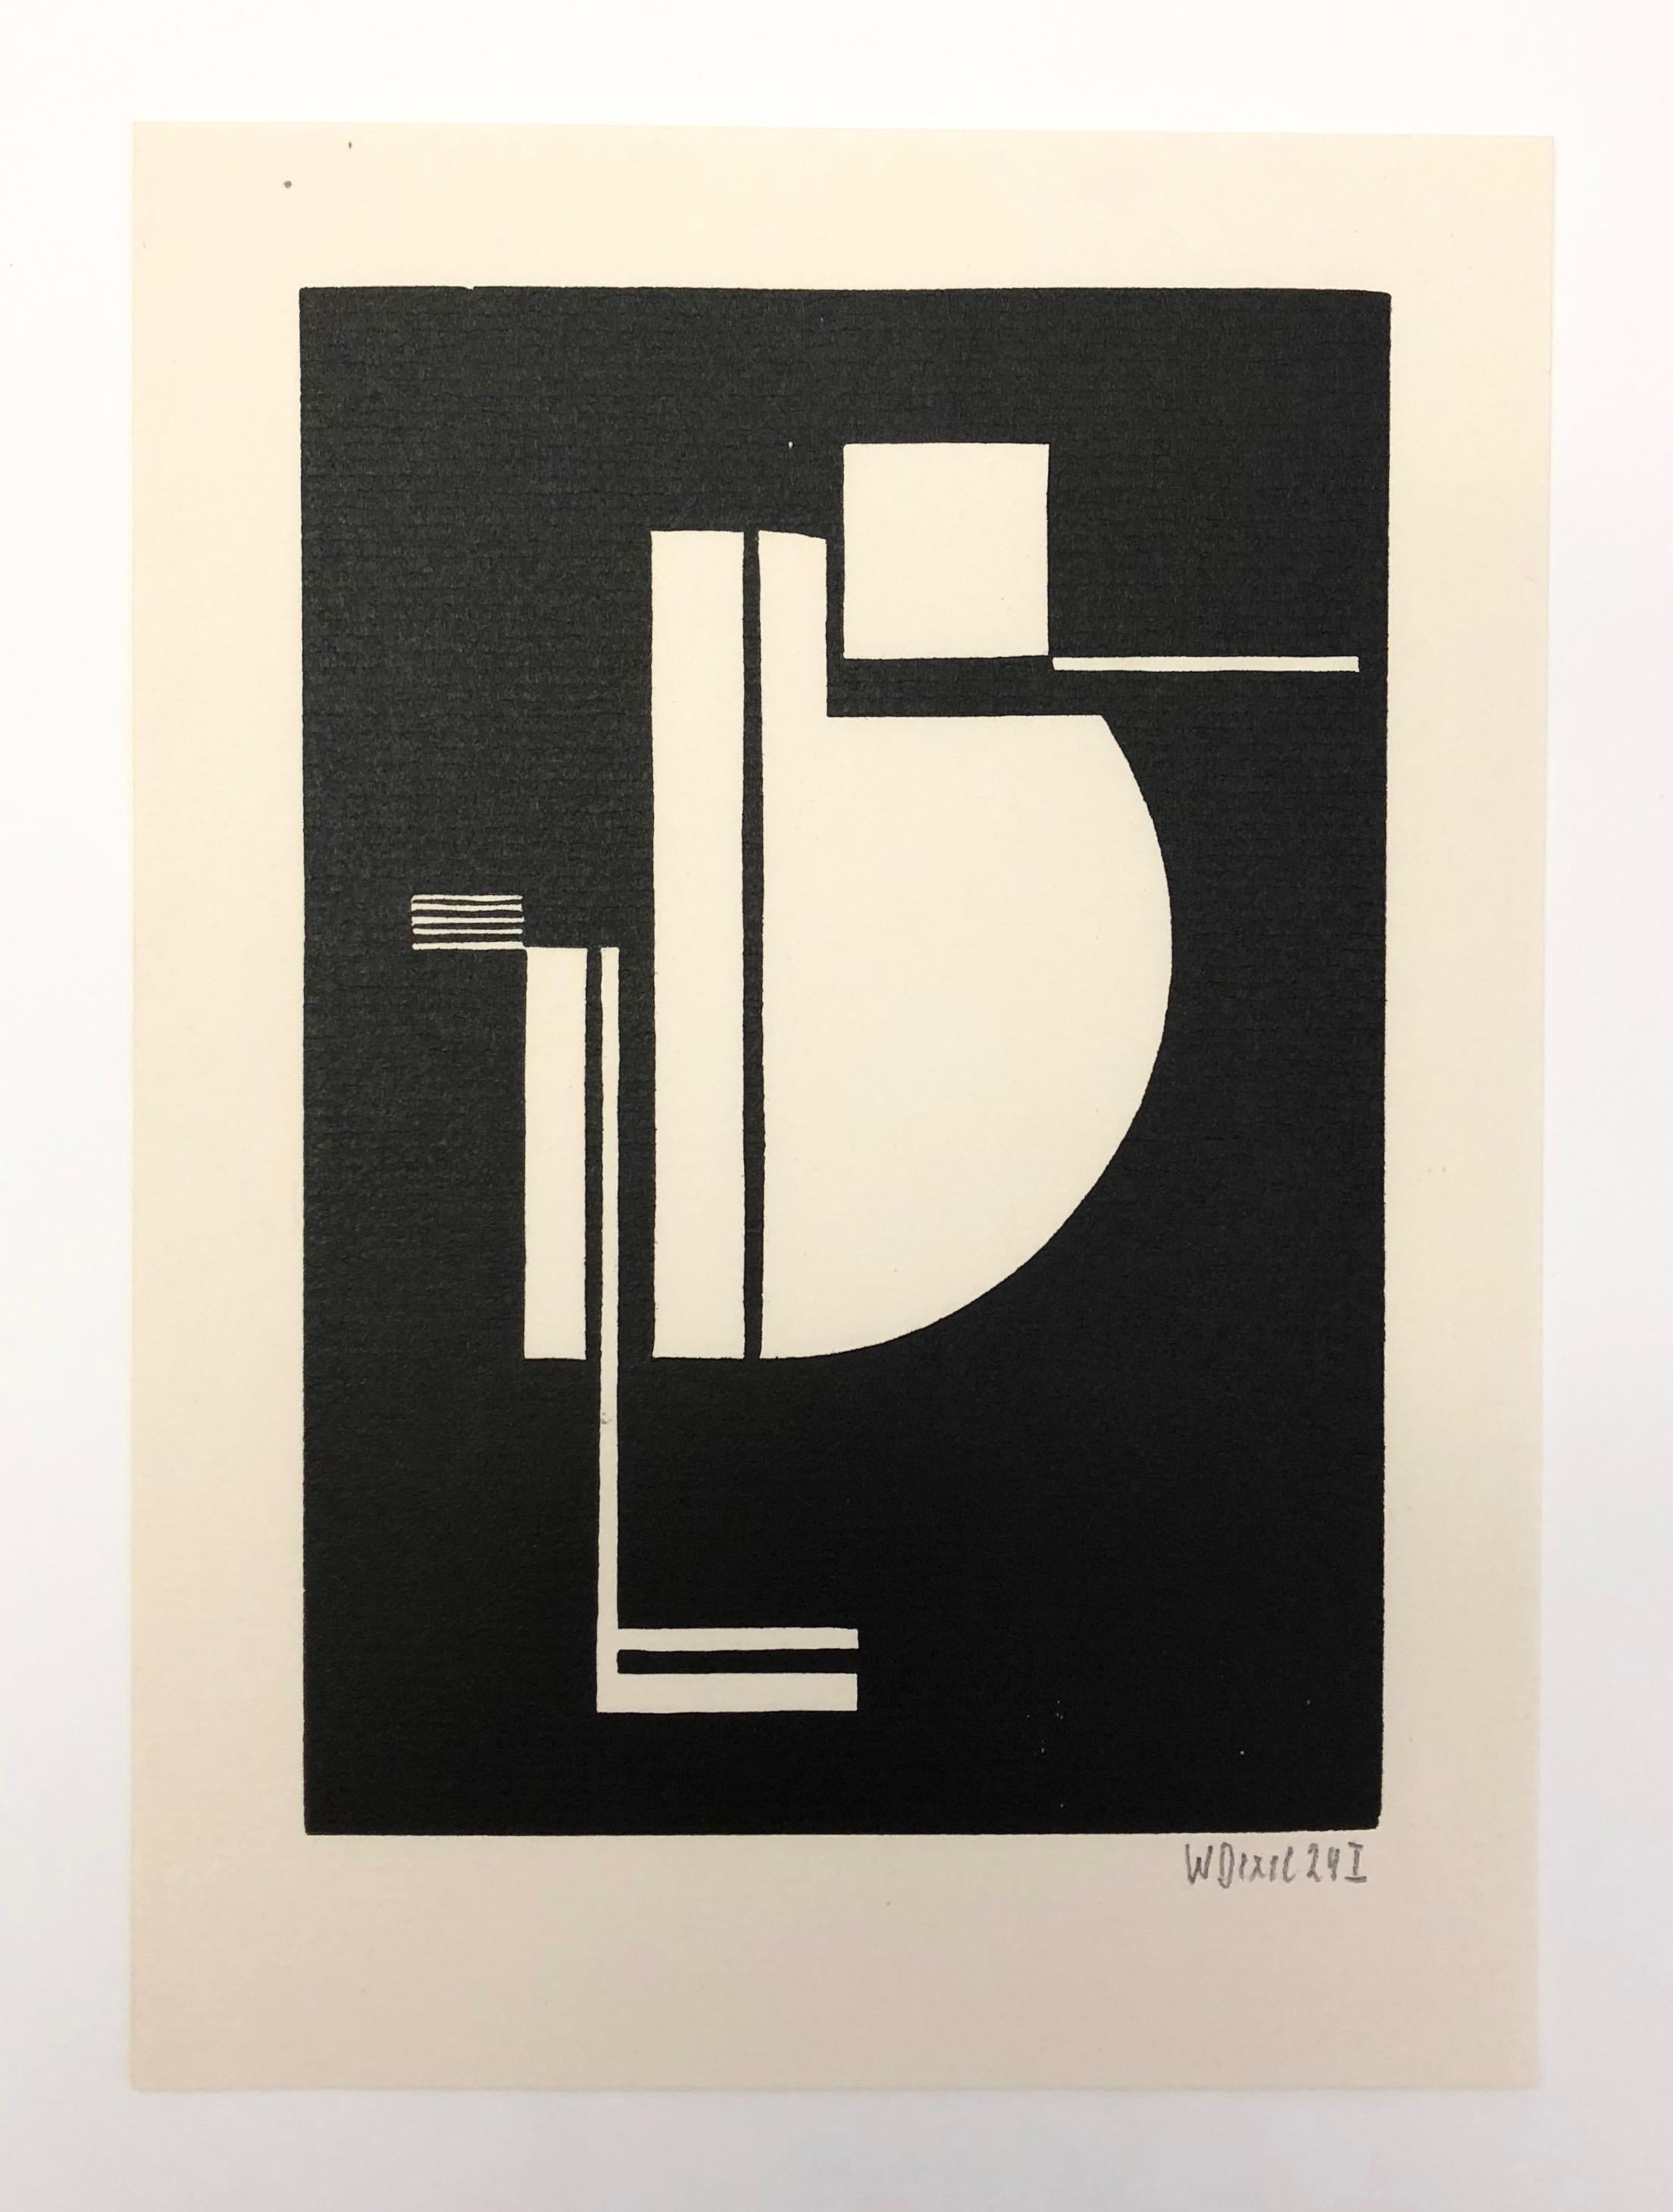 A rare woodcut by  Bauhaus professor Walter Dexel. Very nice woodcut by Walter Dexel from 1924, very typical Bauhaus shapes, made by the Edition Panderma in Basel. Image dimensions 16.2 x 13.2 cm, fixed on black cardboard (30 x 30 cm). 